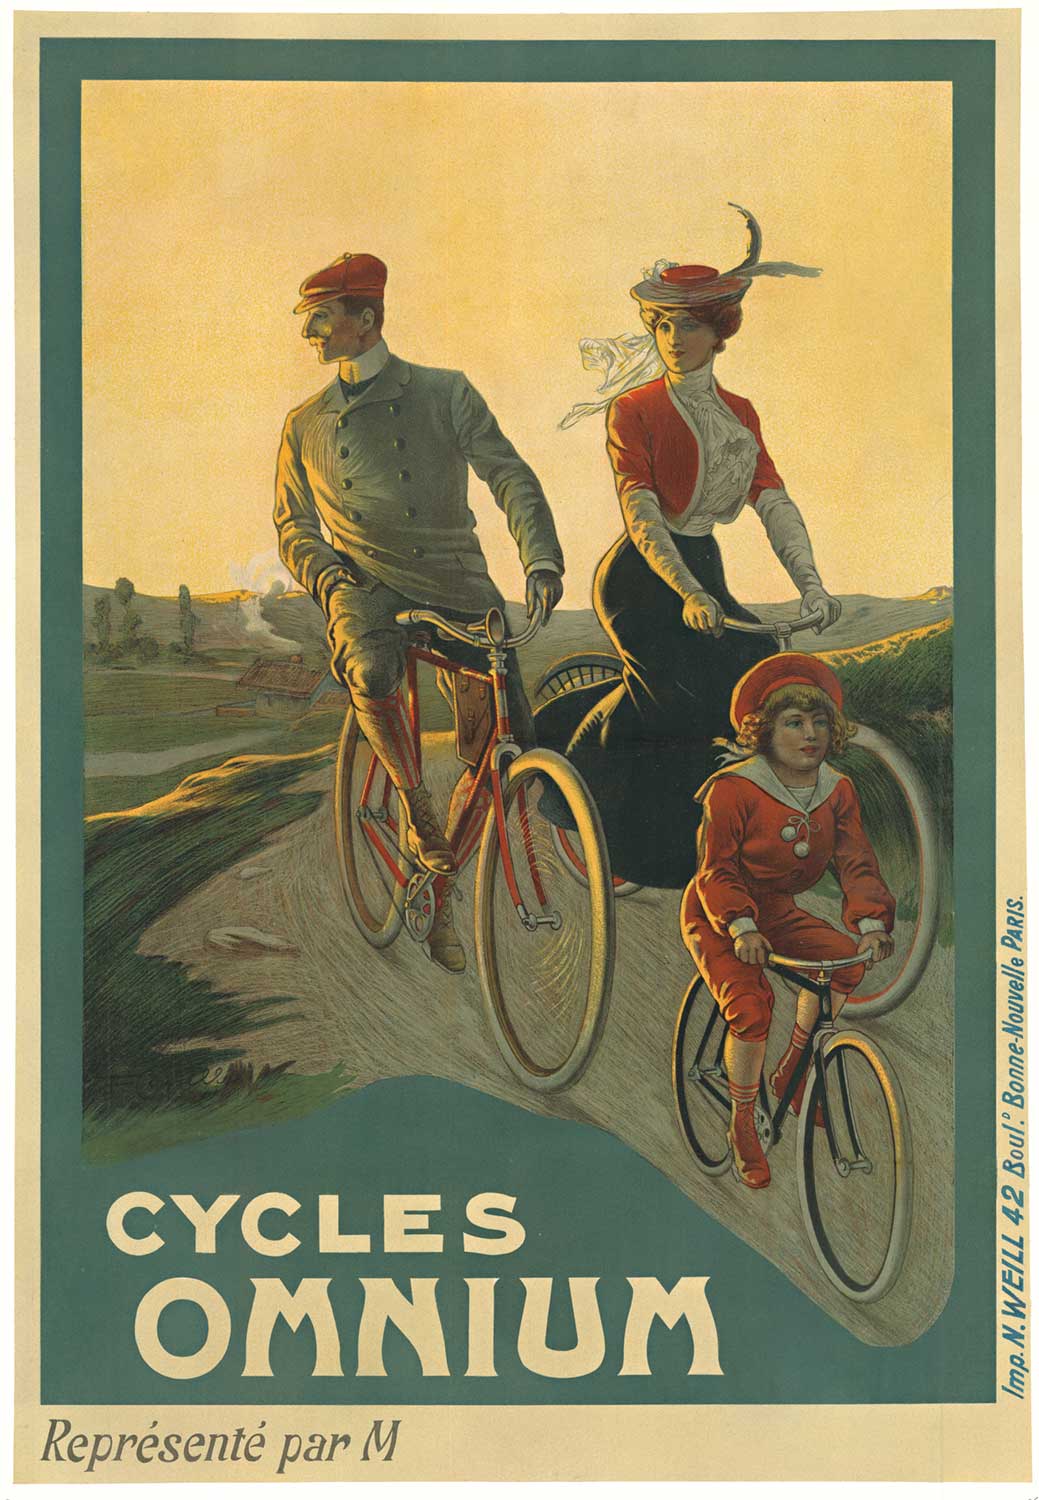 Original Cycles Omnium antique vintage French bicycle poster from the late 1880's - 1890's. Printer: N. Weill, Paris, France. Archival linen backed and ready to frame. There was an area in the right hand sky (creamish yellow) top area that has had 